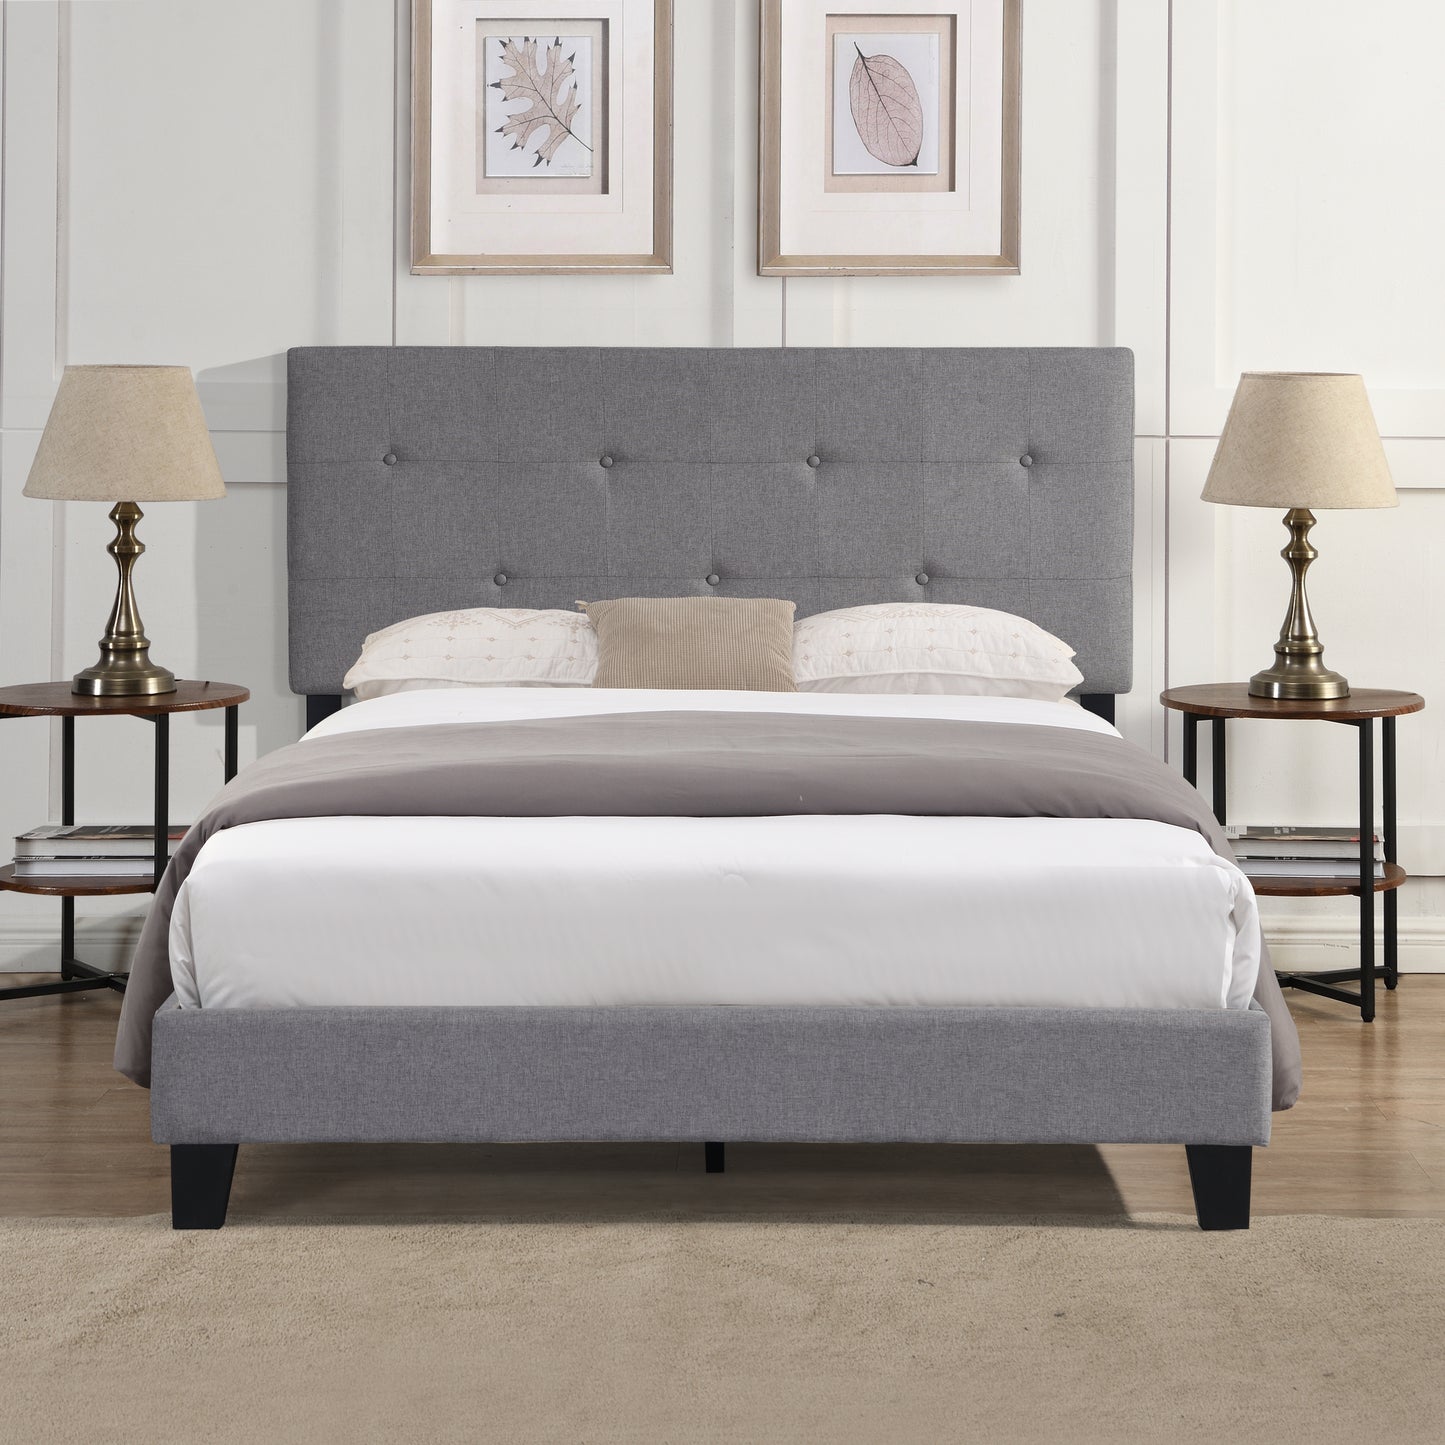 Queen Size Upholstered Platform Bed Frame with Button Tufted Linen Fabric Headboard, No Box Spring Needed, Wood Slat Support, Easy Assembly,  Gray